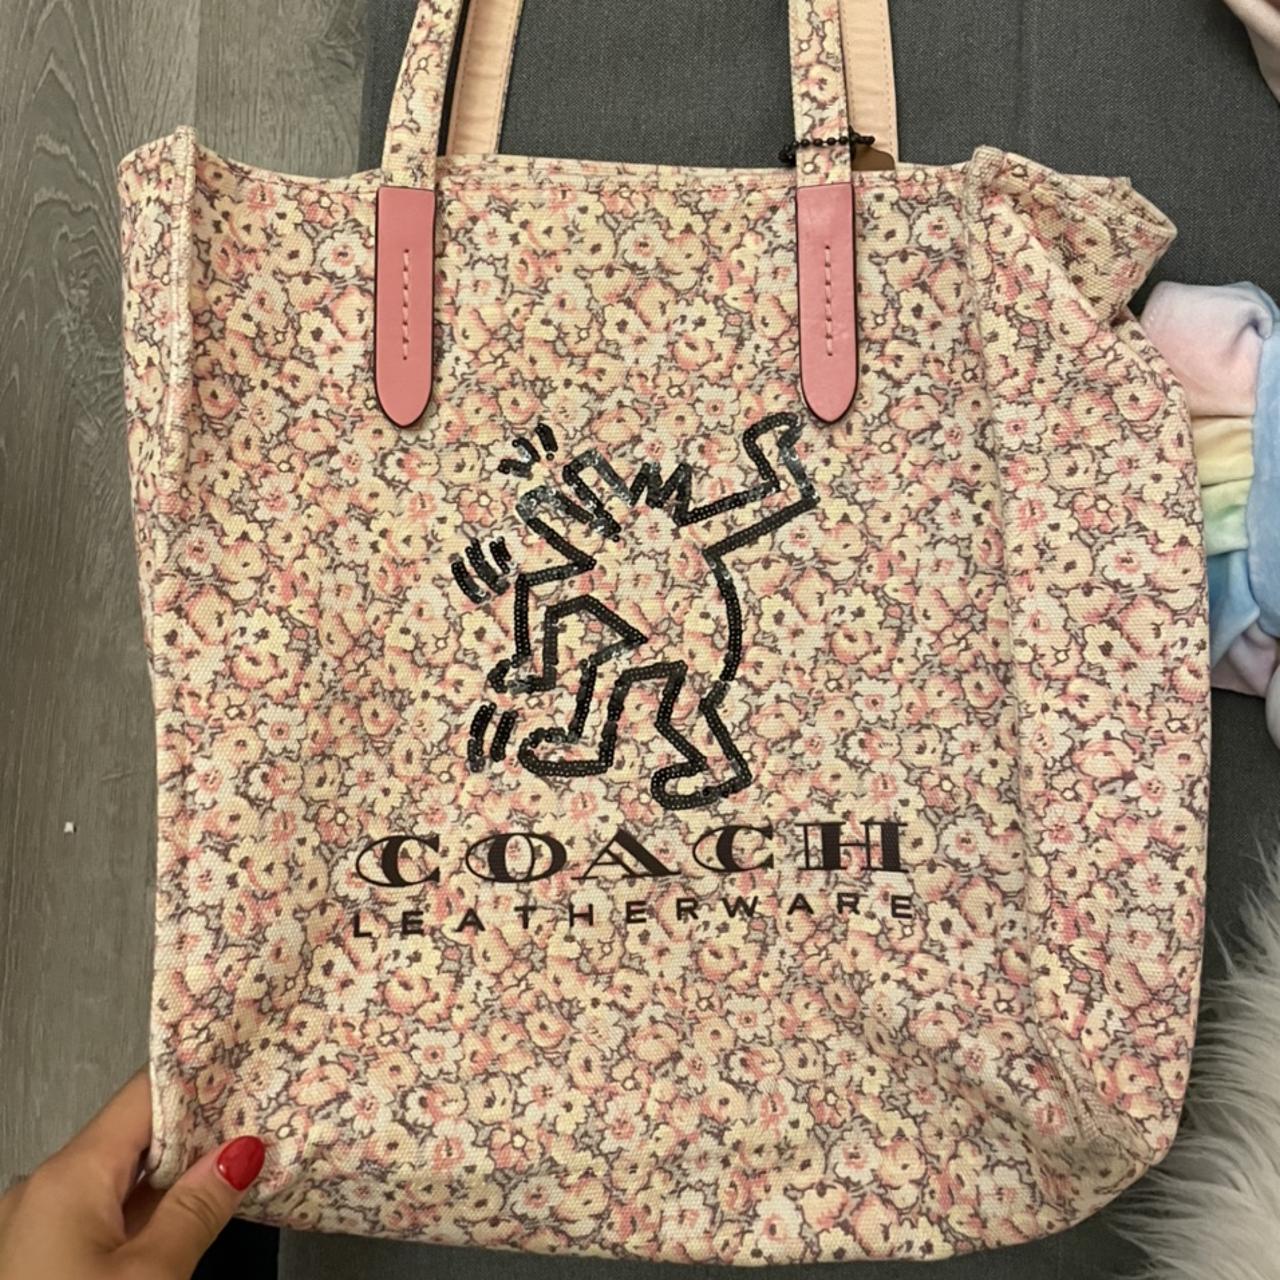 COACH Floral Purse in Pink